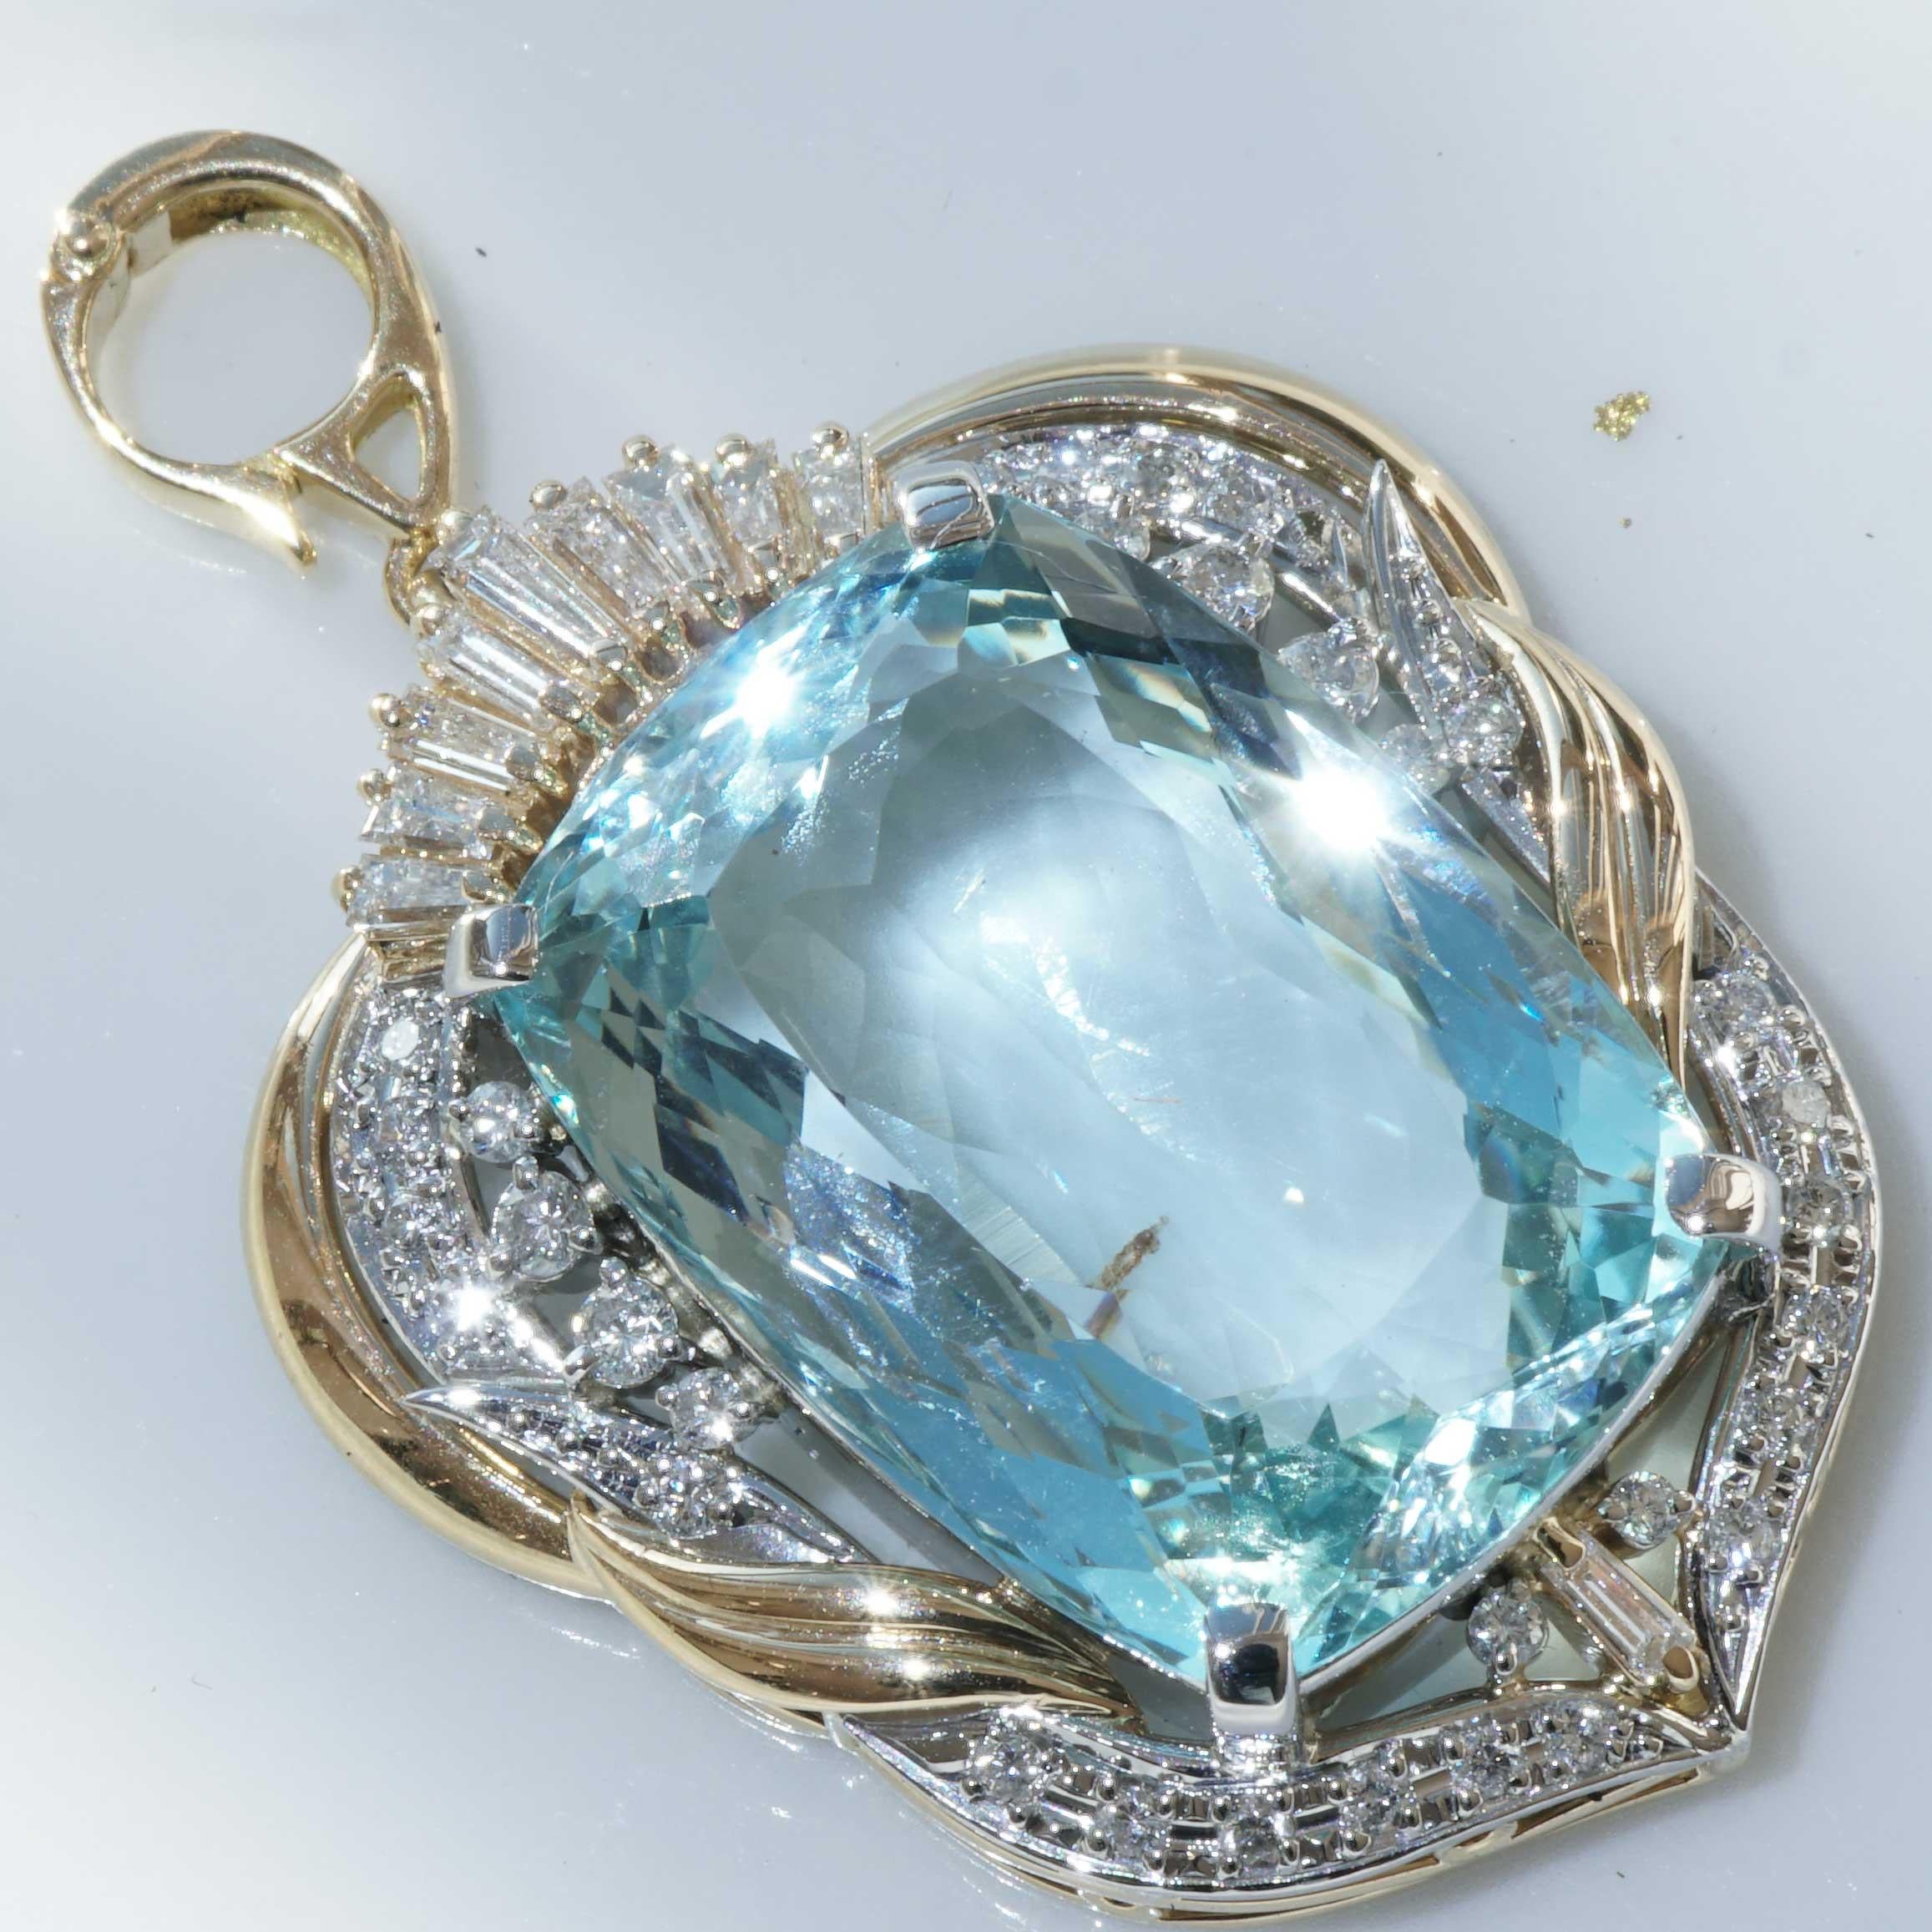 Pendant with very fine aquamarine in a rectangle cut of 24.50 ct, AAA+, 22 x 15.5 mm, eye-clean (in the picture you can mistakenly see reflections that look like inclusions), lavishly decorated with full-cut brilliant-cut diamonds and diamond